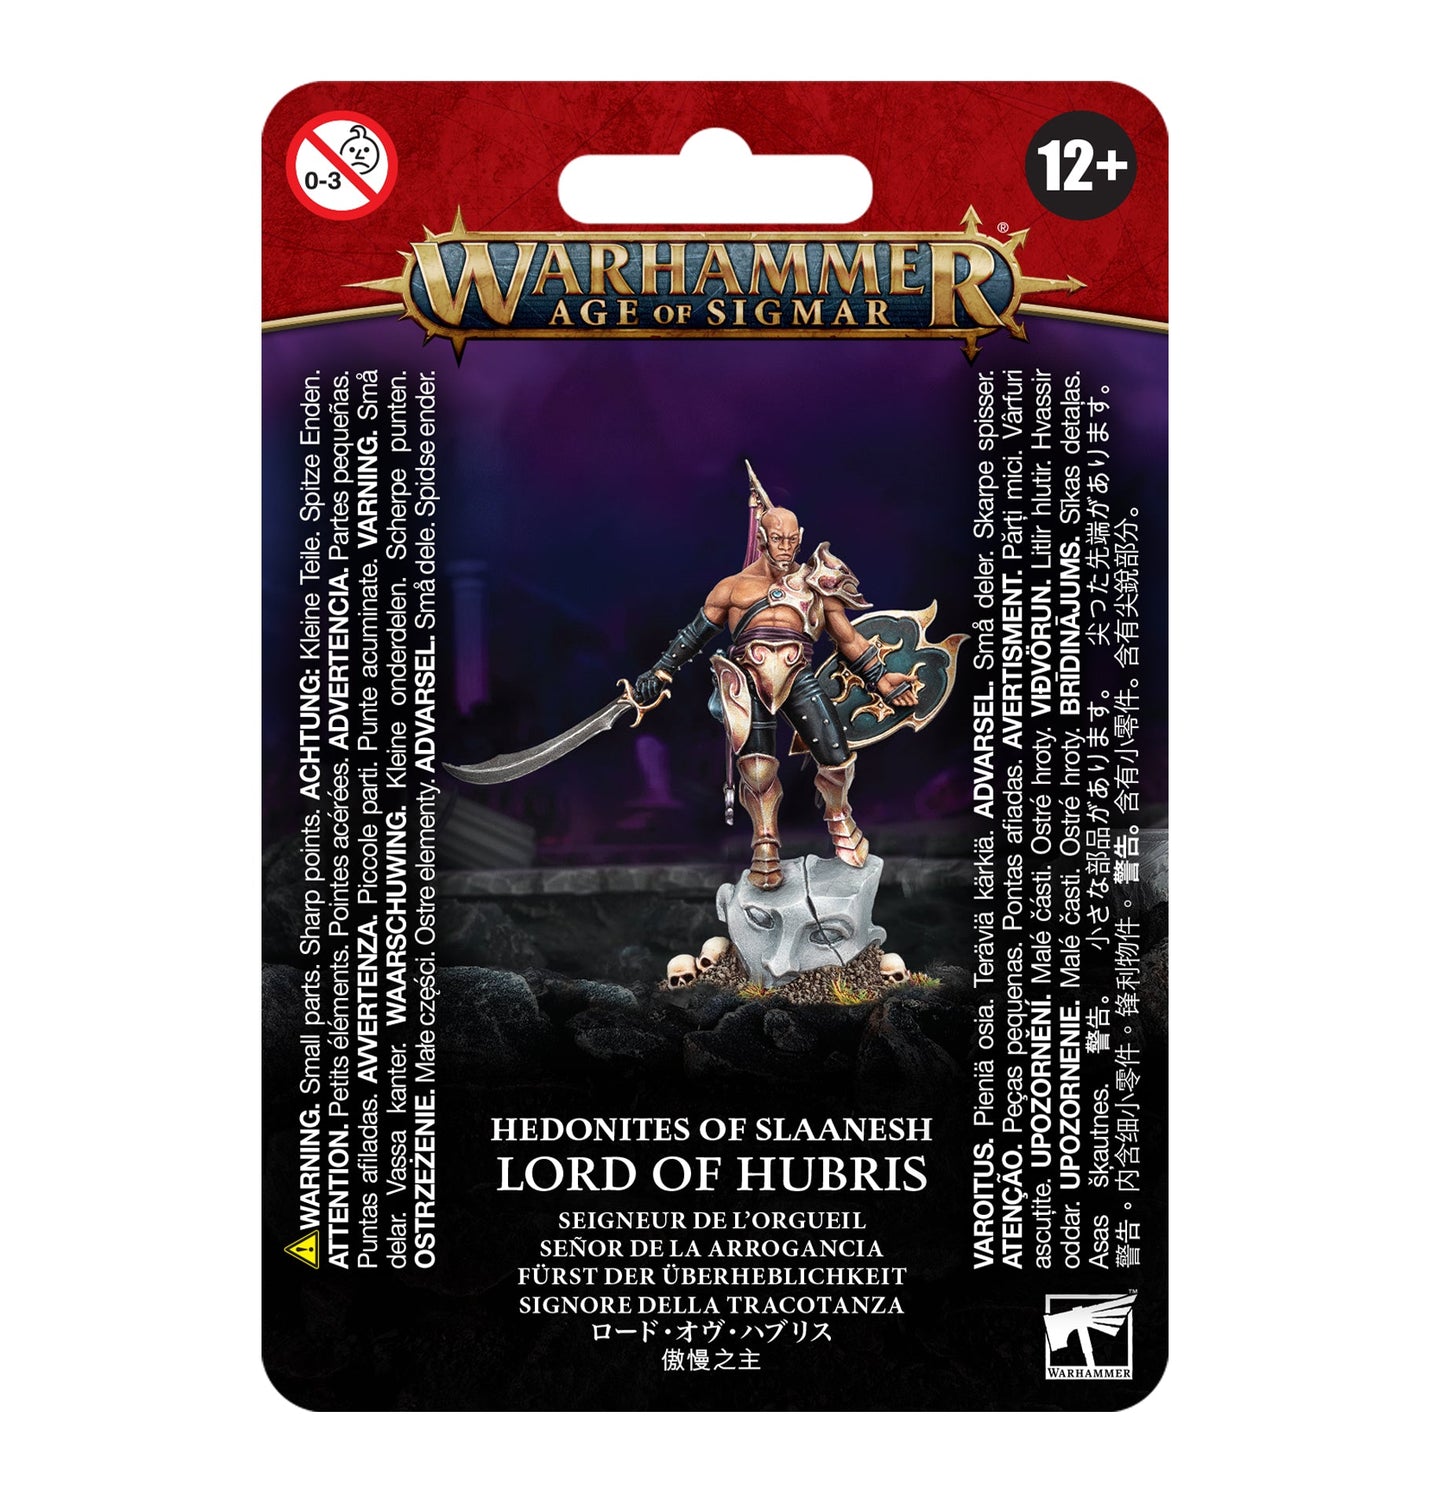 Lord of Humbris package cover